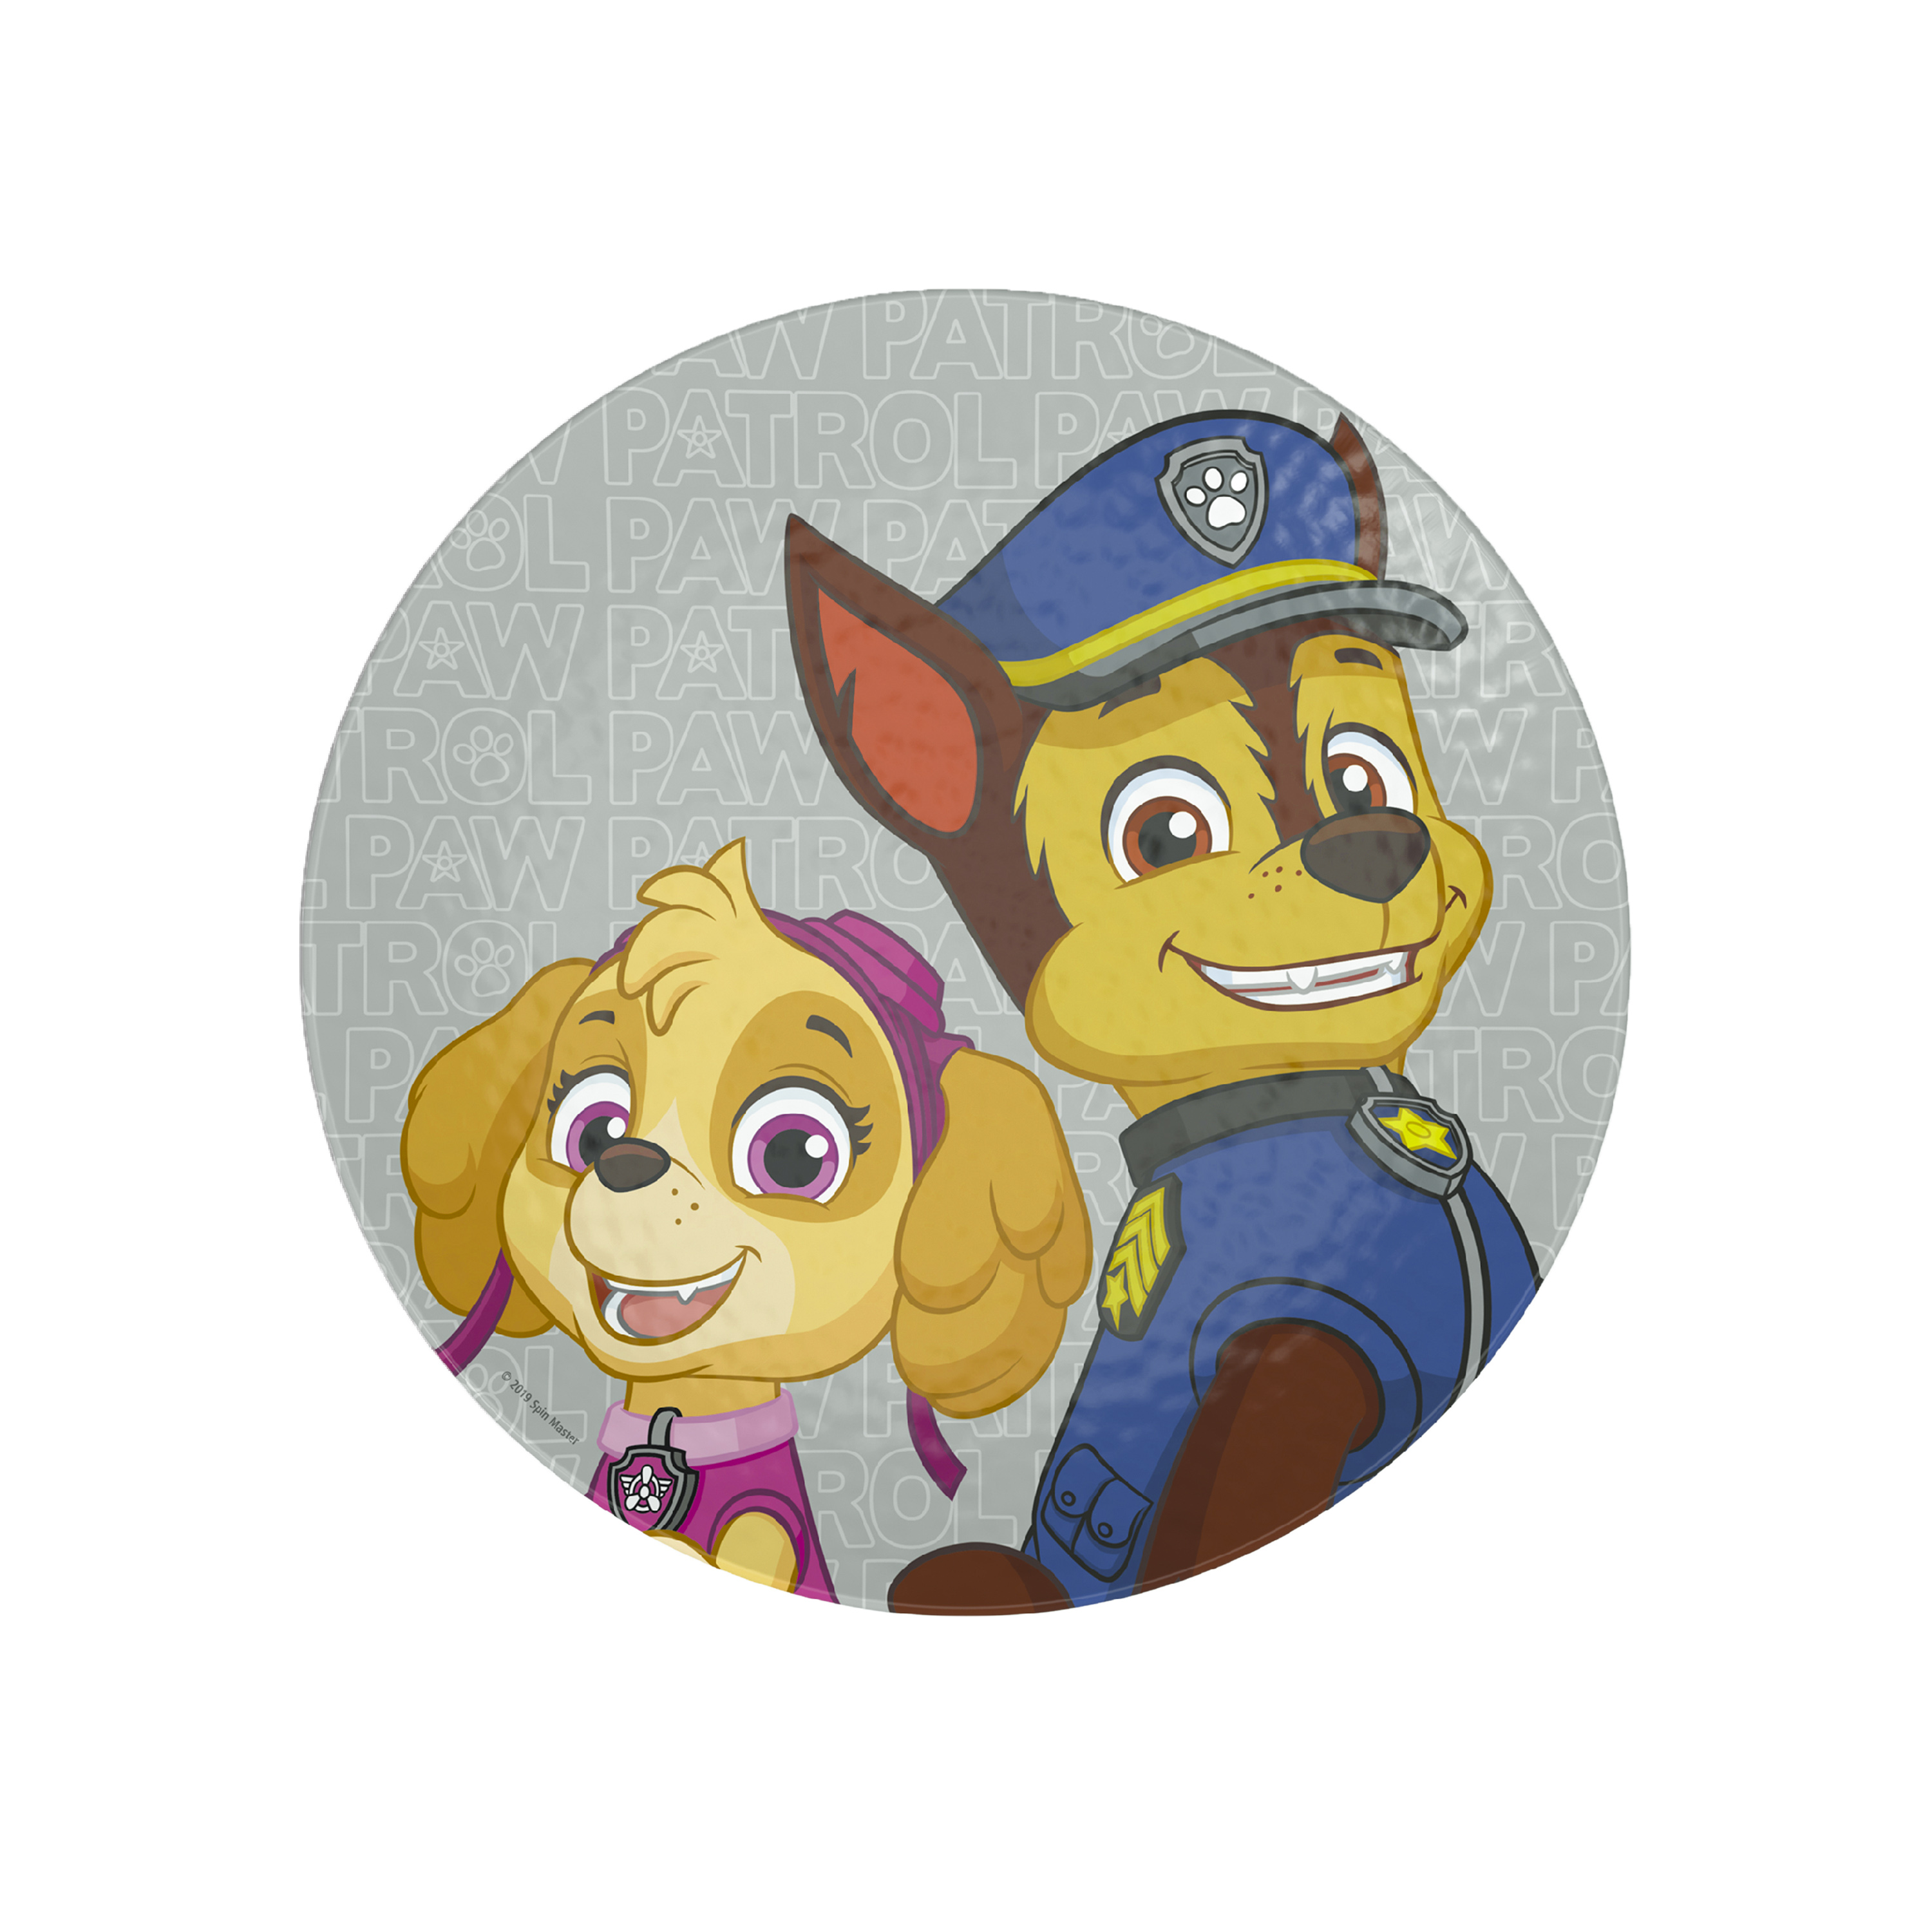 Paw patrol Kids 9-inch Plate and 6-inch Bowl Set, Chase, Skye and Friends, 2-piece set slideshow image 6